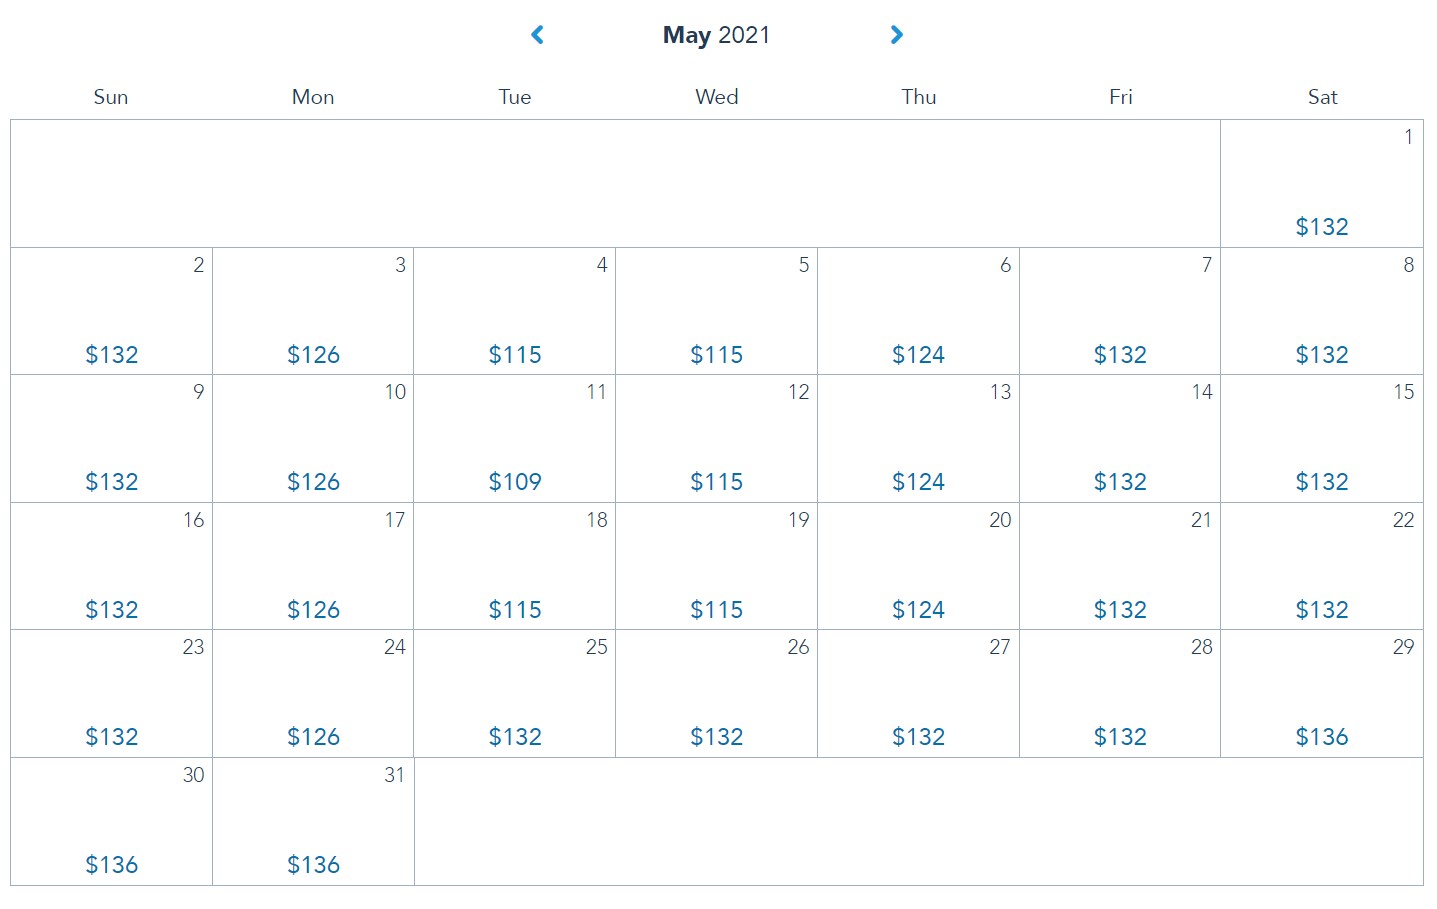 May 2021 Disney ticket prices